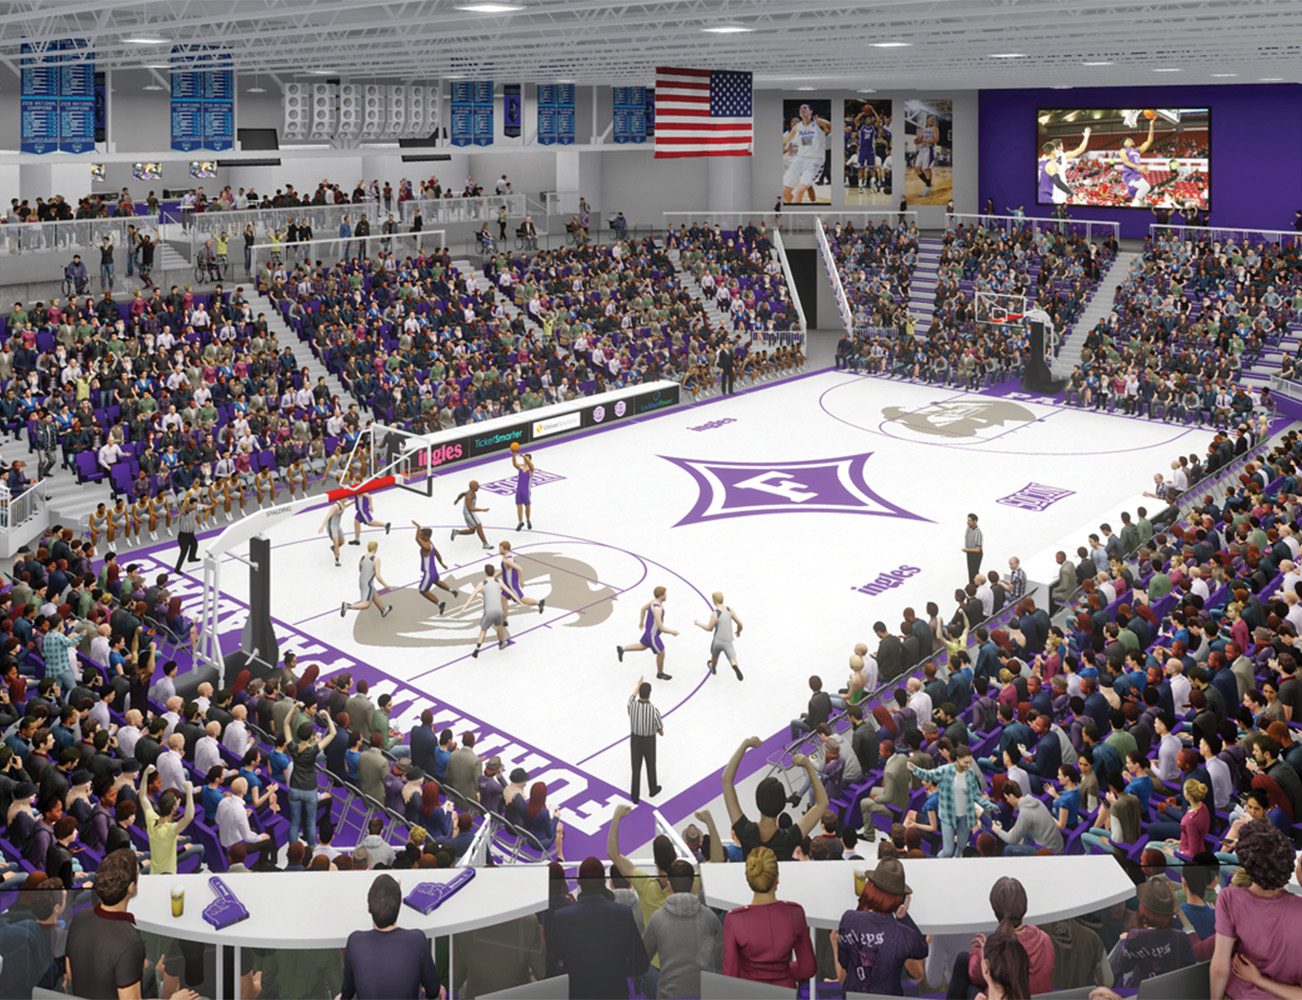 A rendering of the arena bowl after renovations. / Betsch and Associates